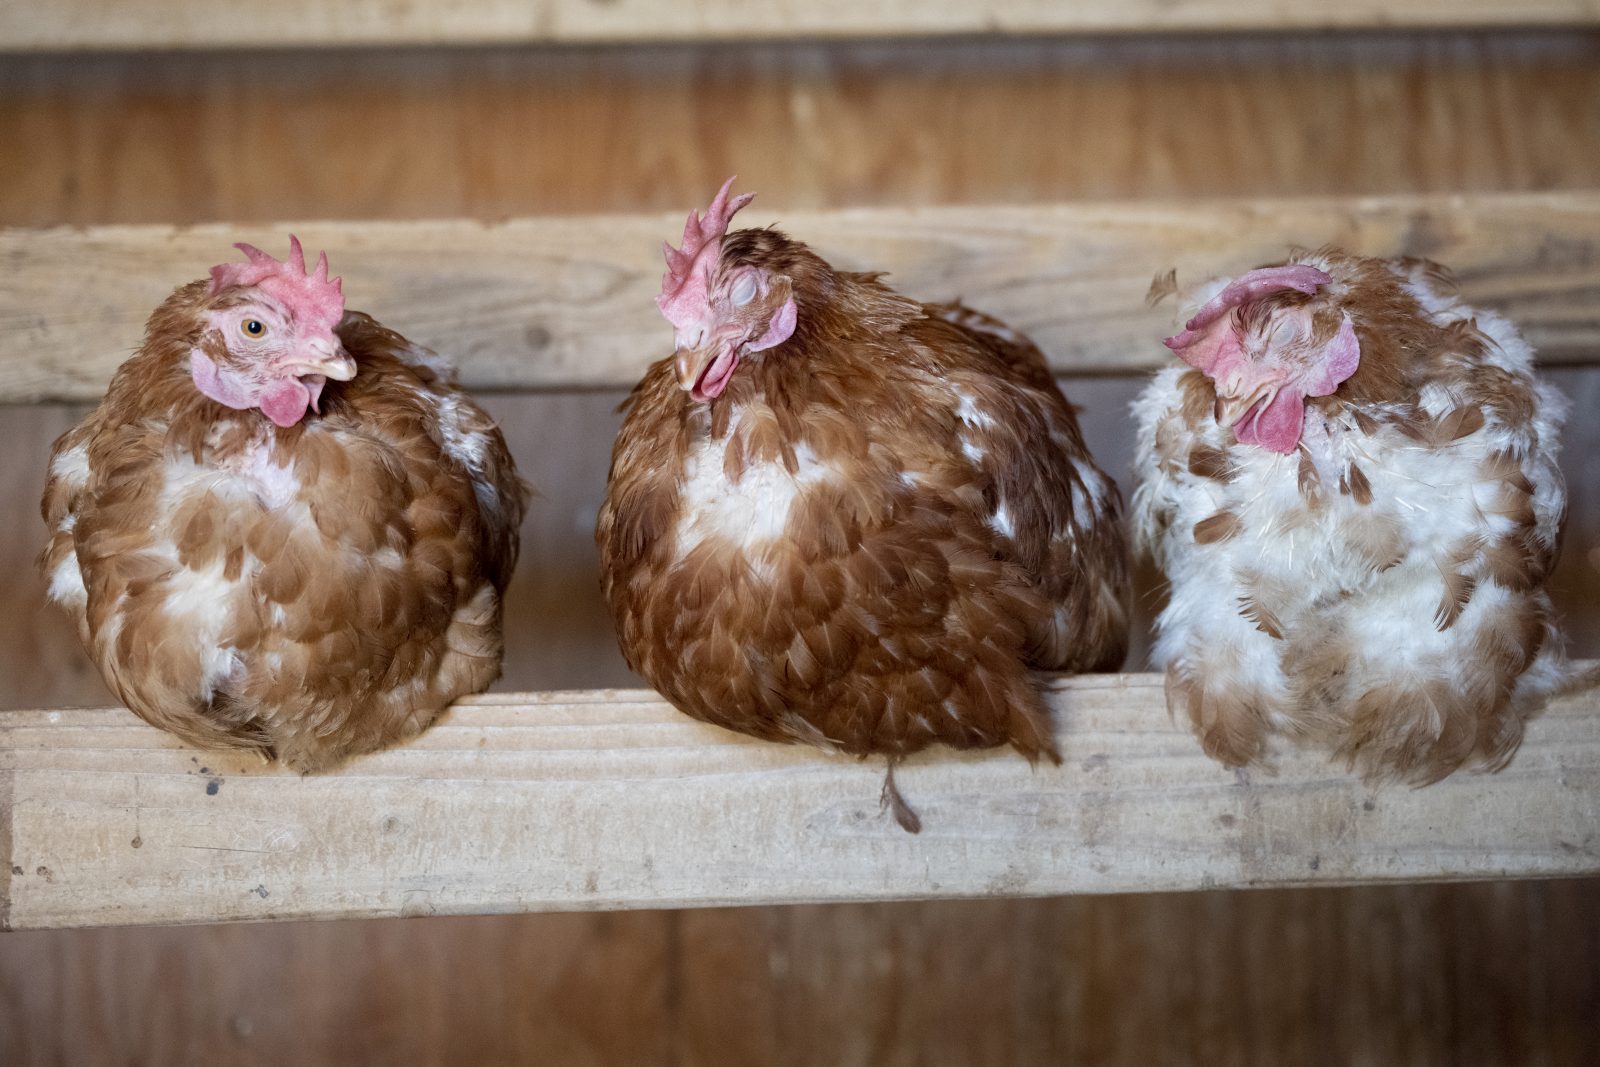 Redding Hens Nausicaa, Saphira, and Mad Max roosting peacefully at Farm Sanctuary